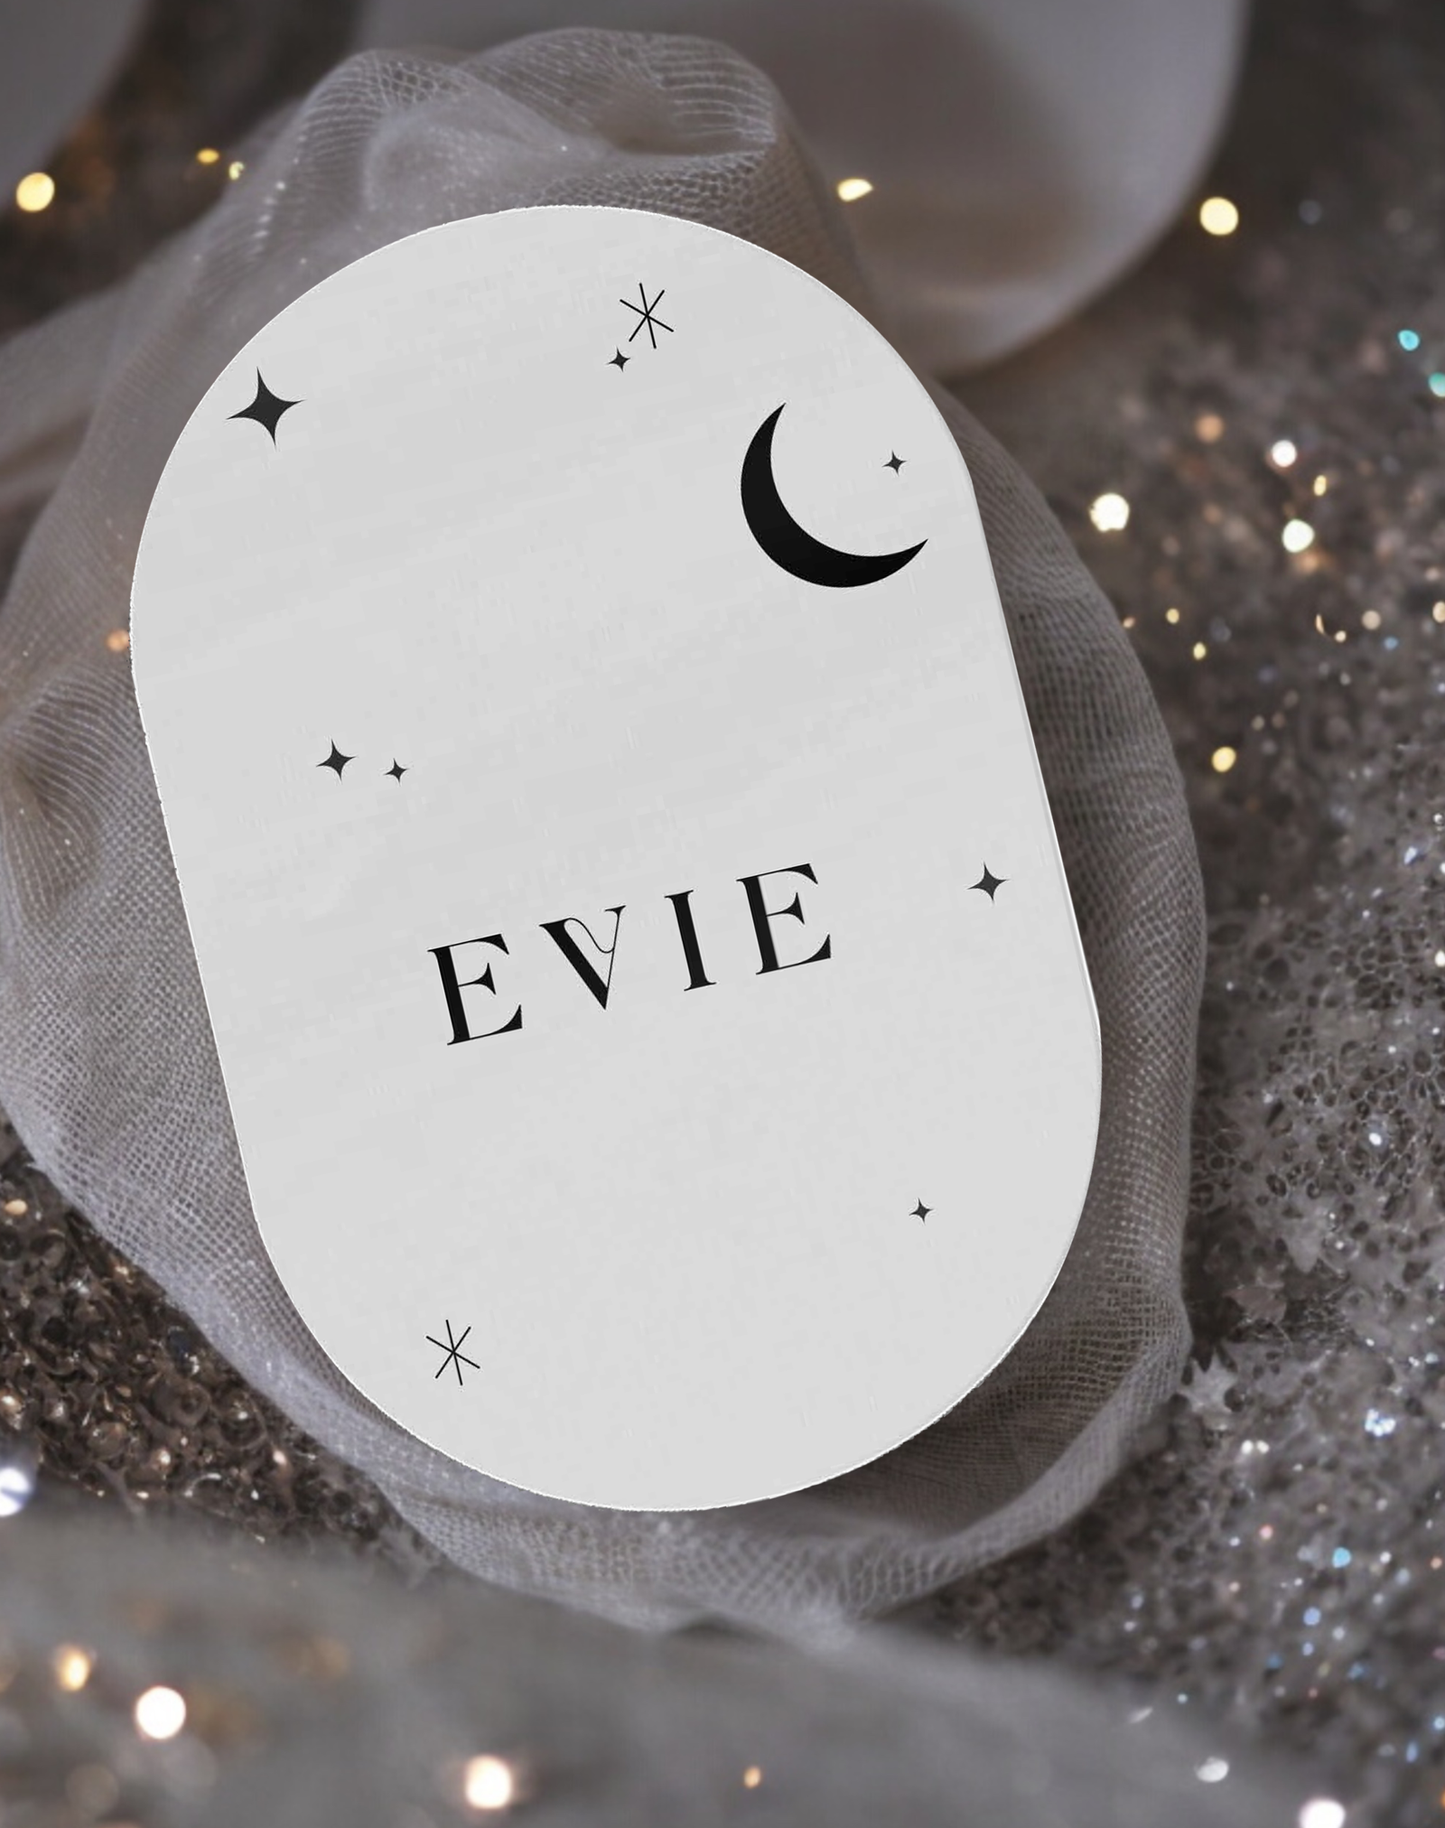 Evie Starry Sky Place Cards - Ivy and Gold Wedding Stationery -  